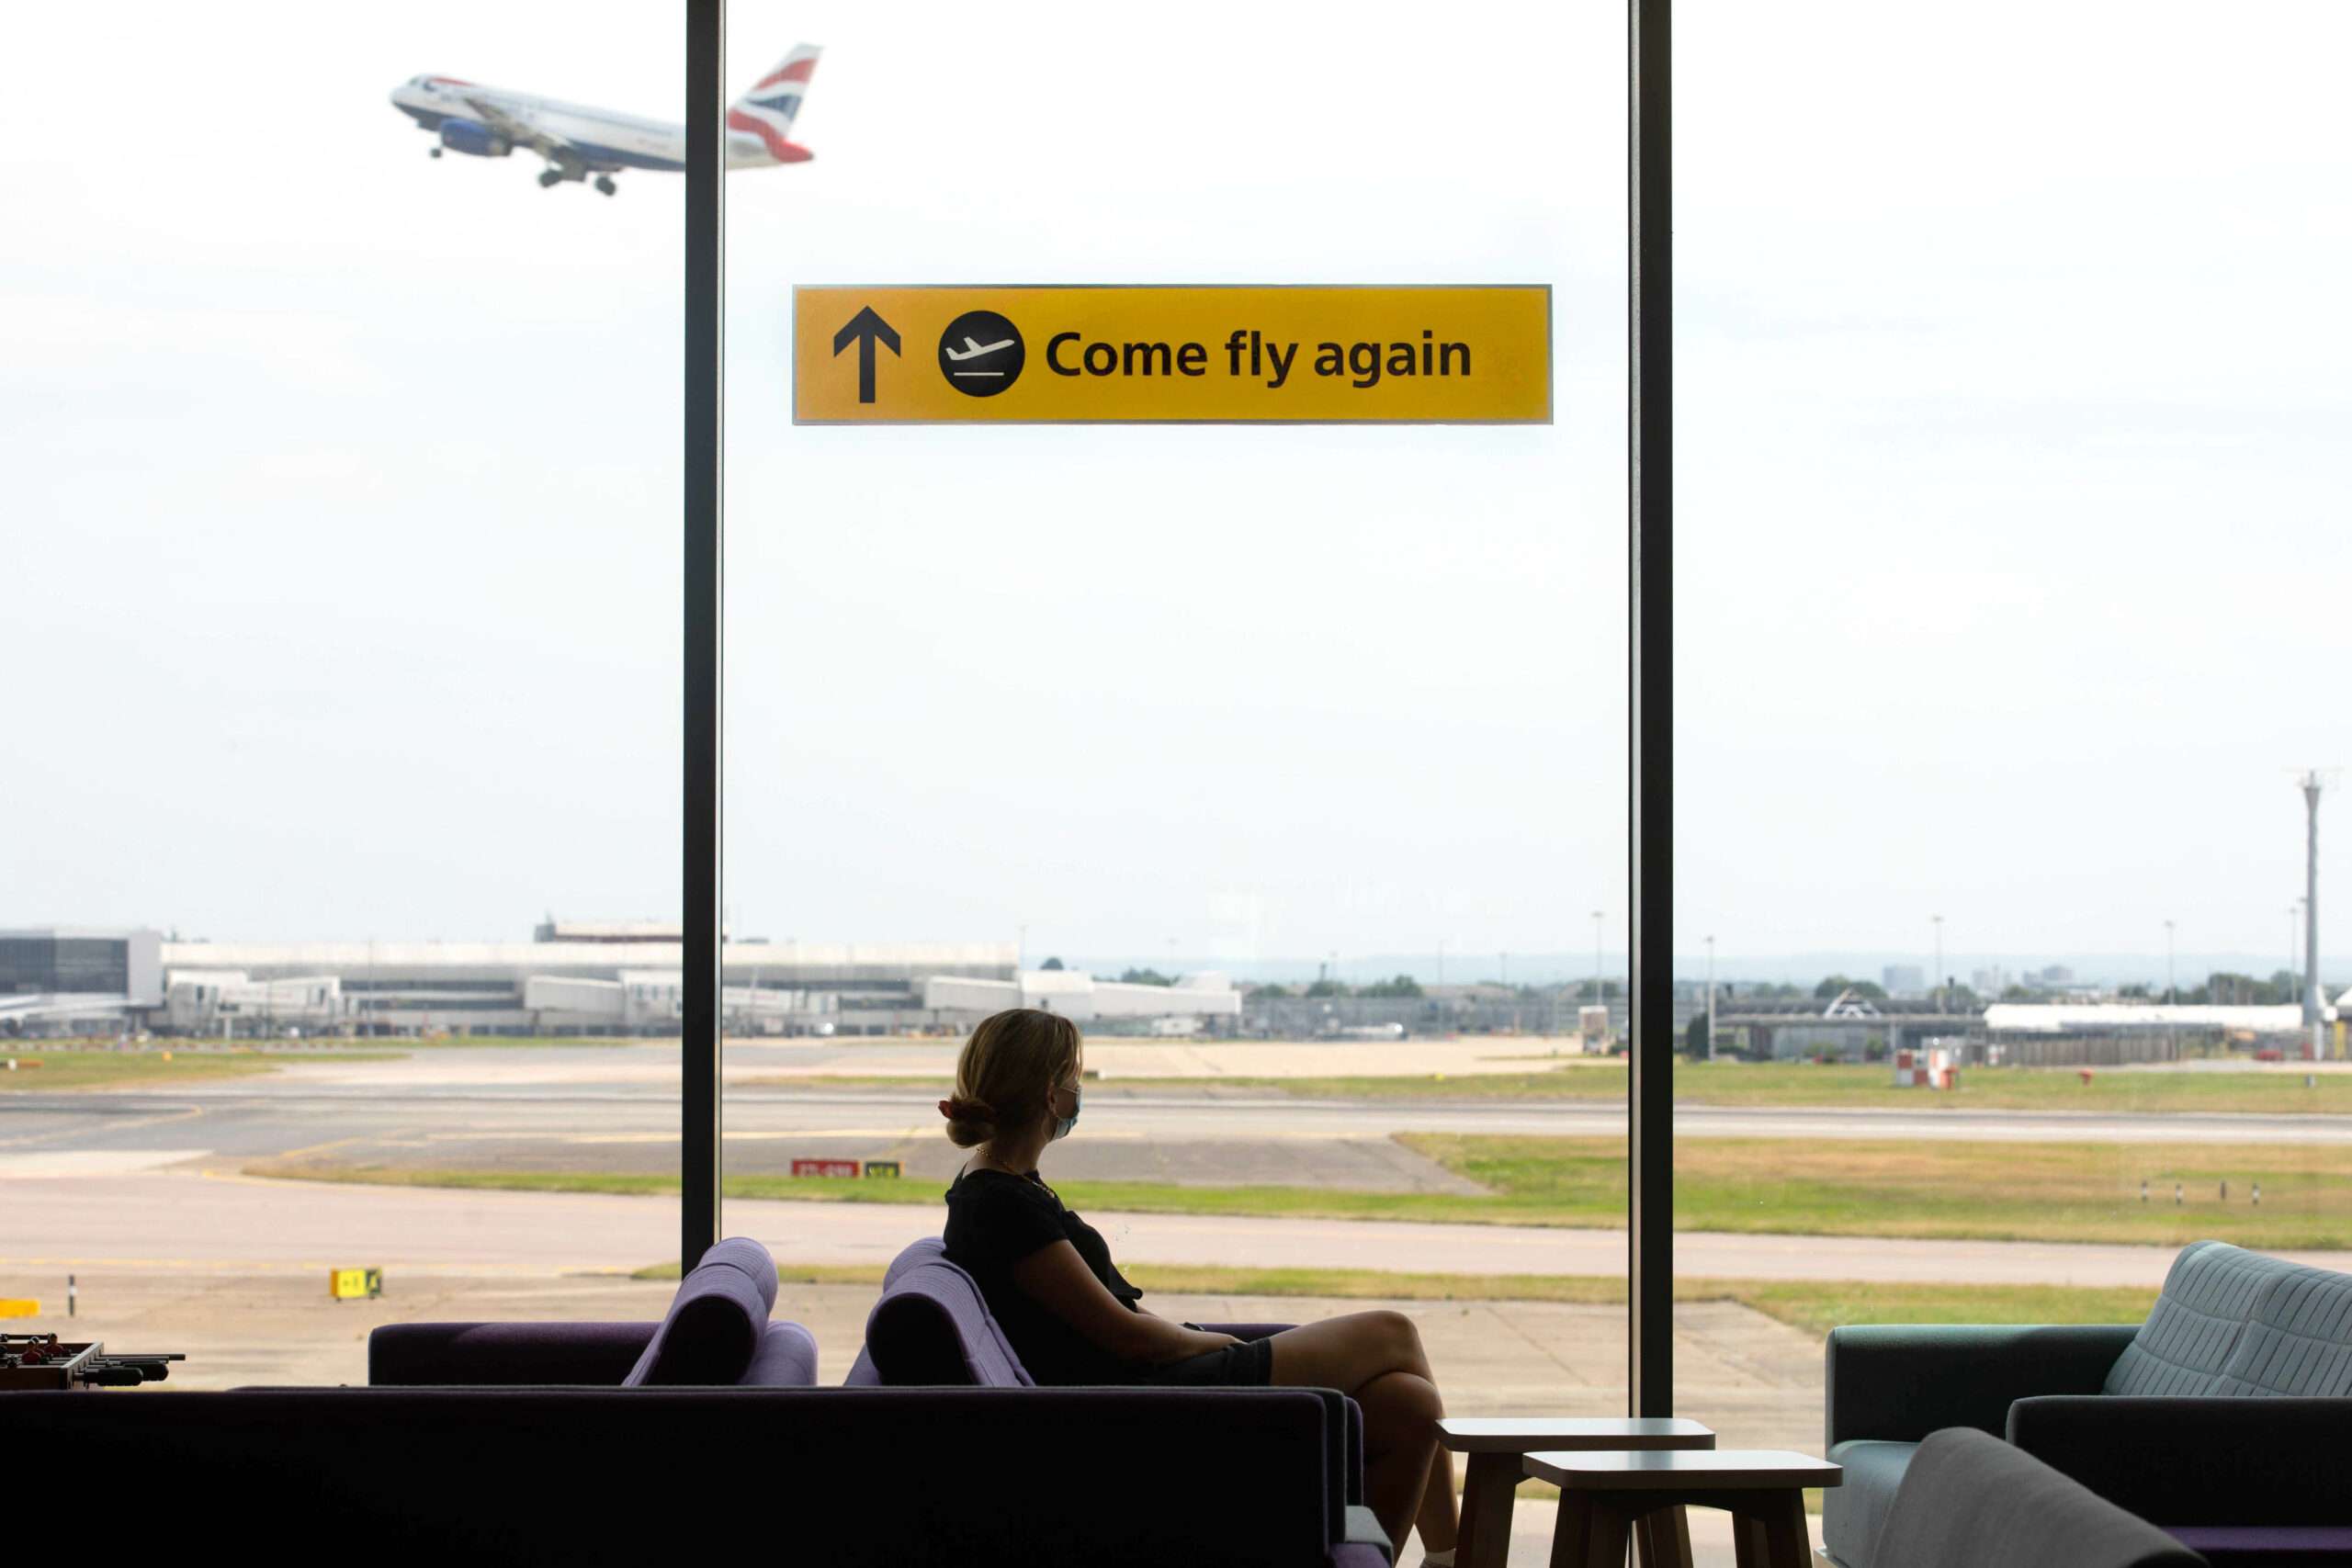 Heathrow Averaged Nearly 250,000 Passengers Daily in July